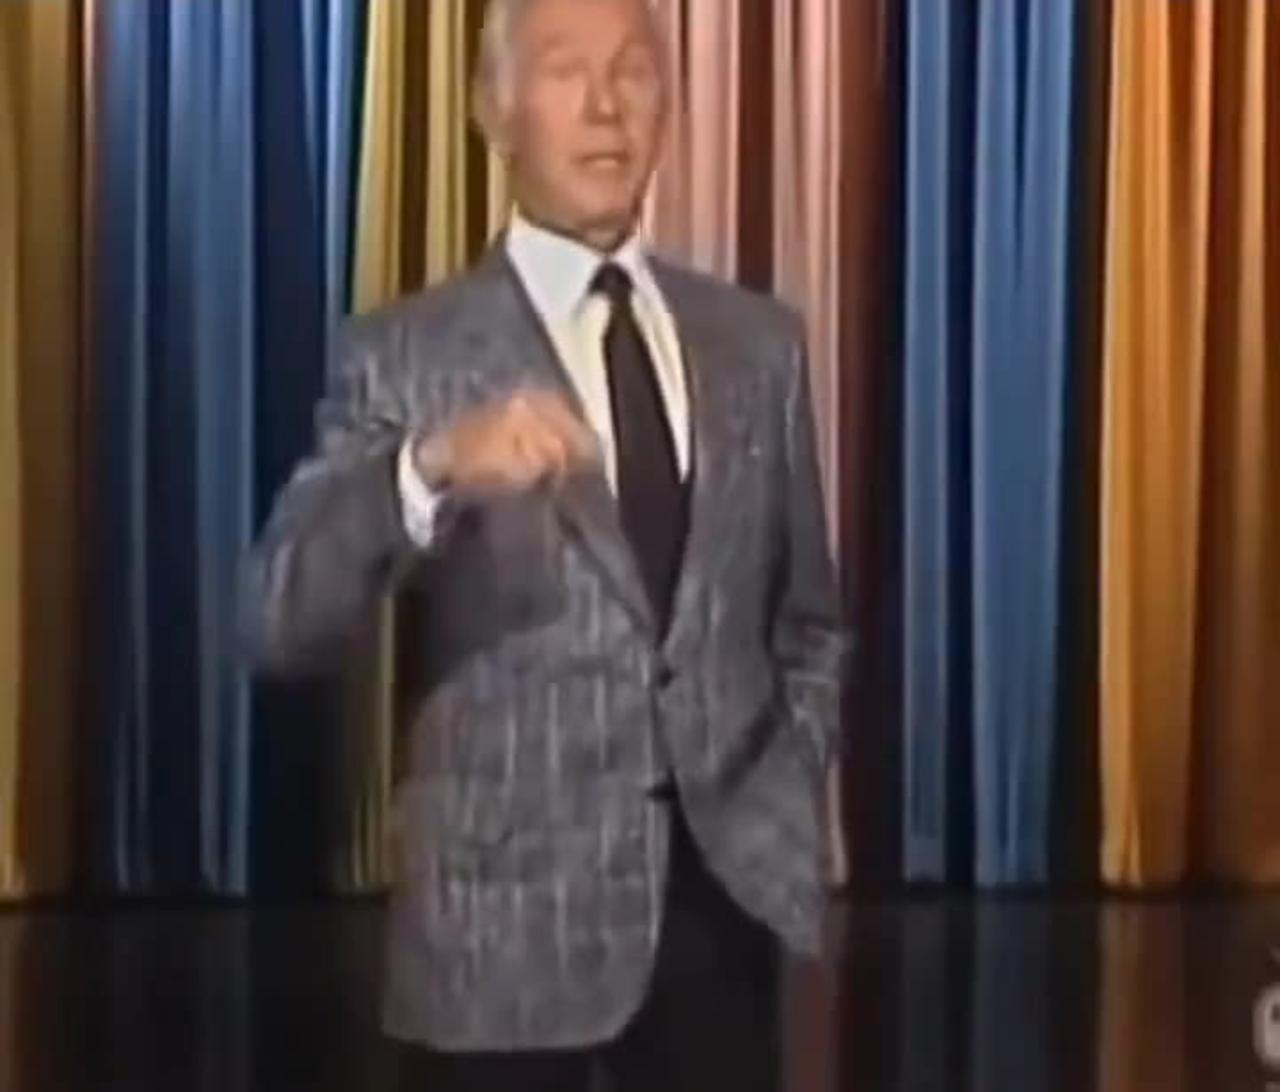 Late-Night Host Johnny Carson Blew the Whistle On Biden 36 Years Ago